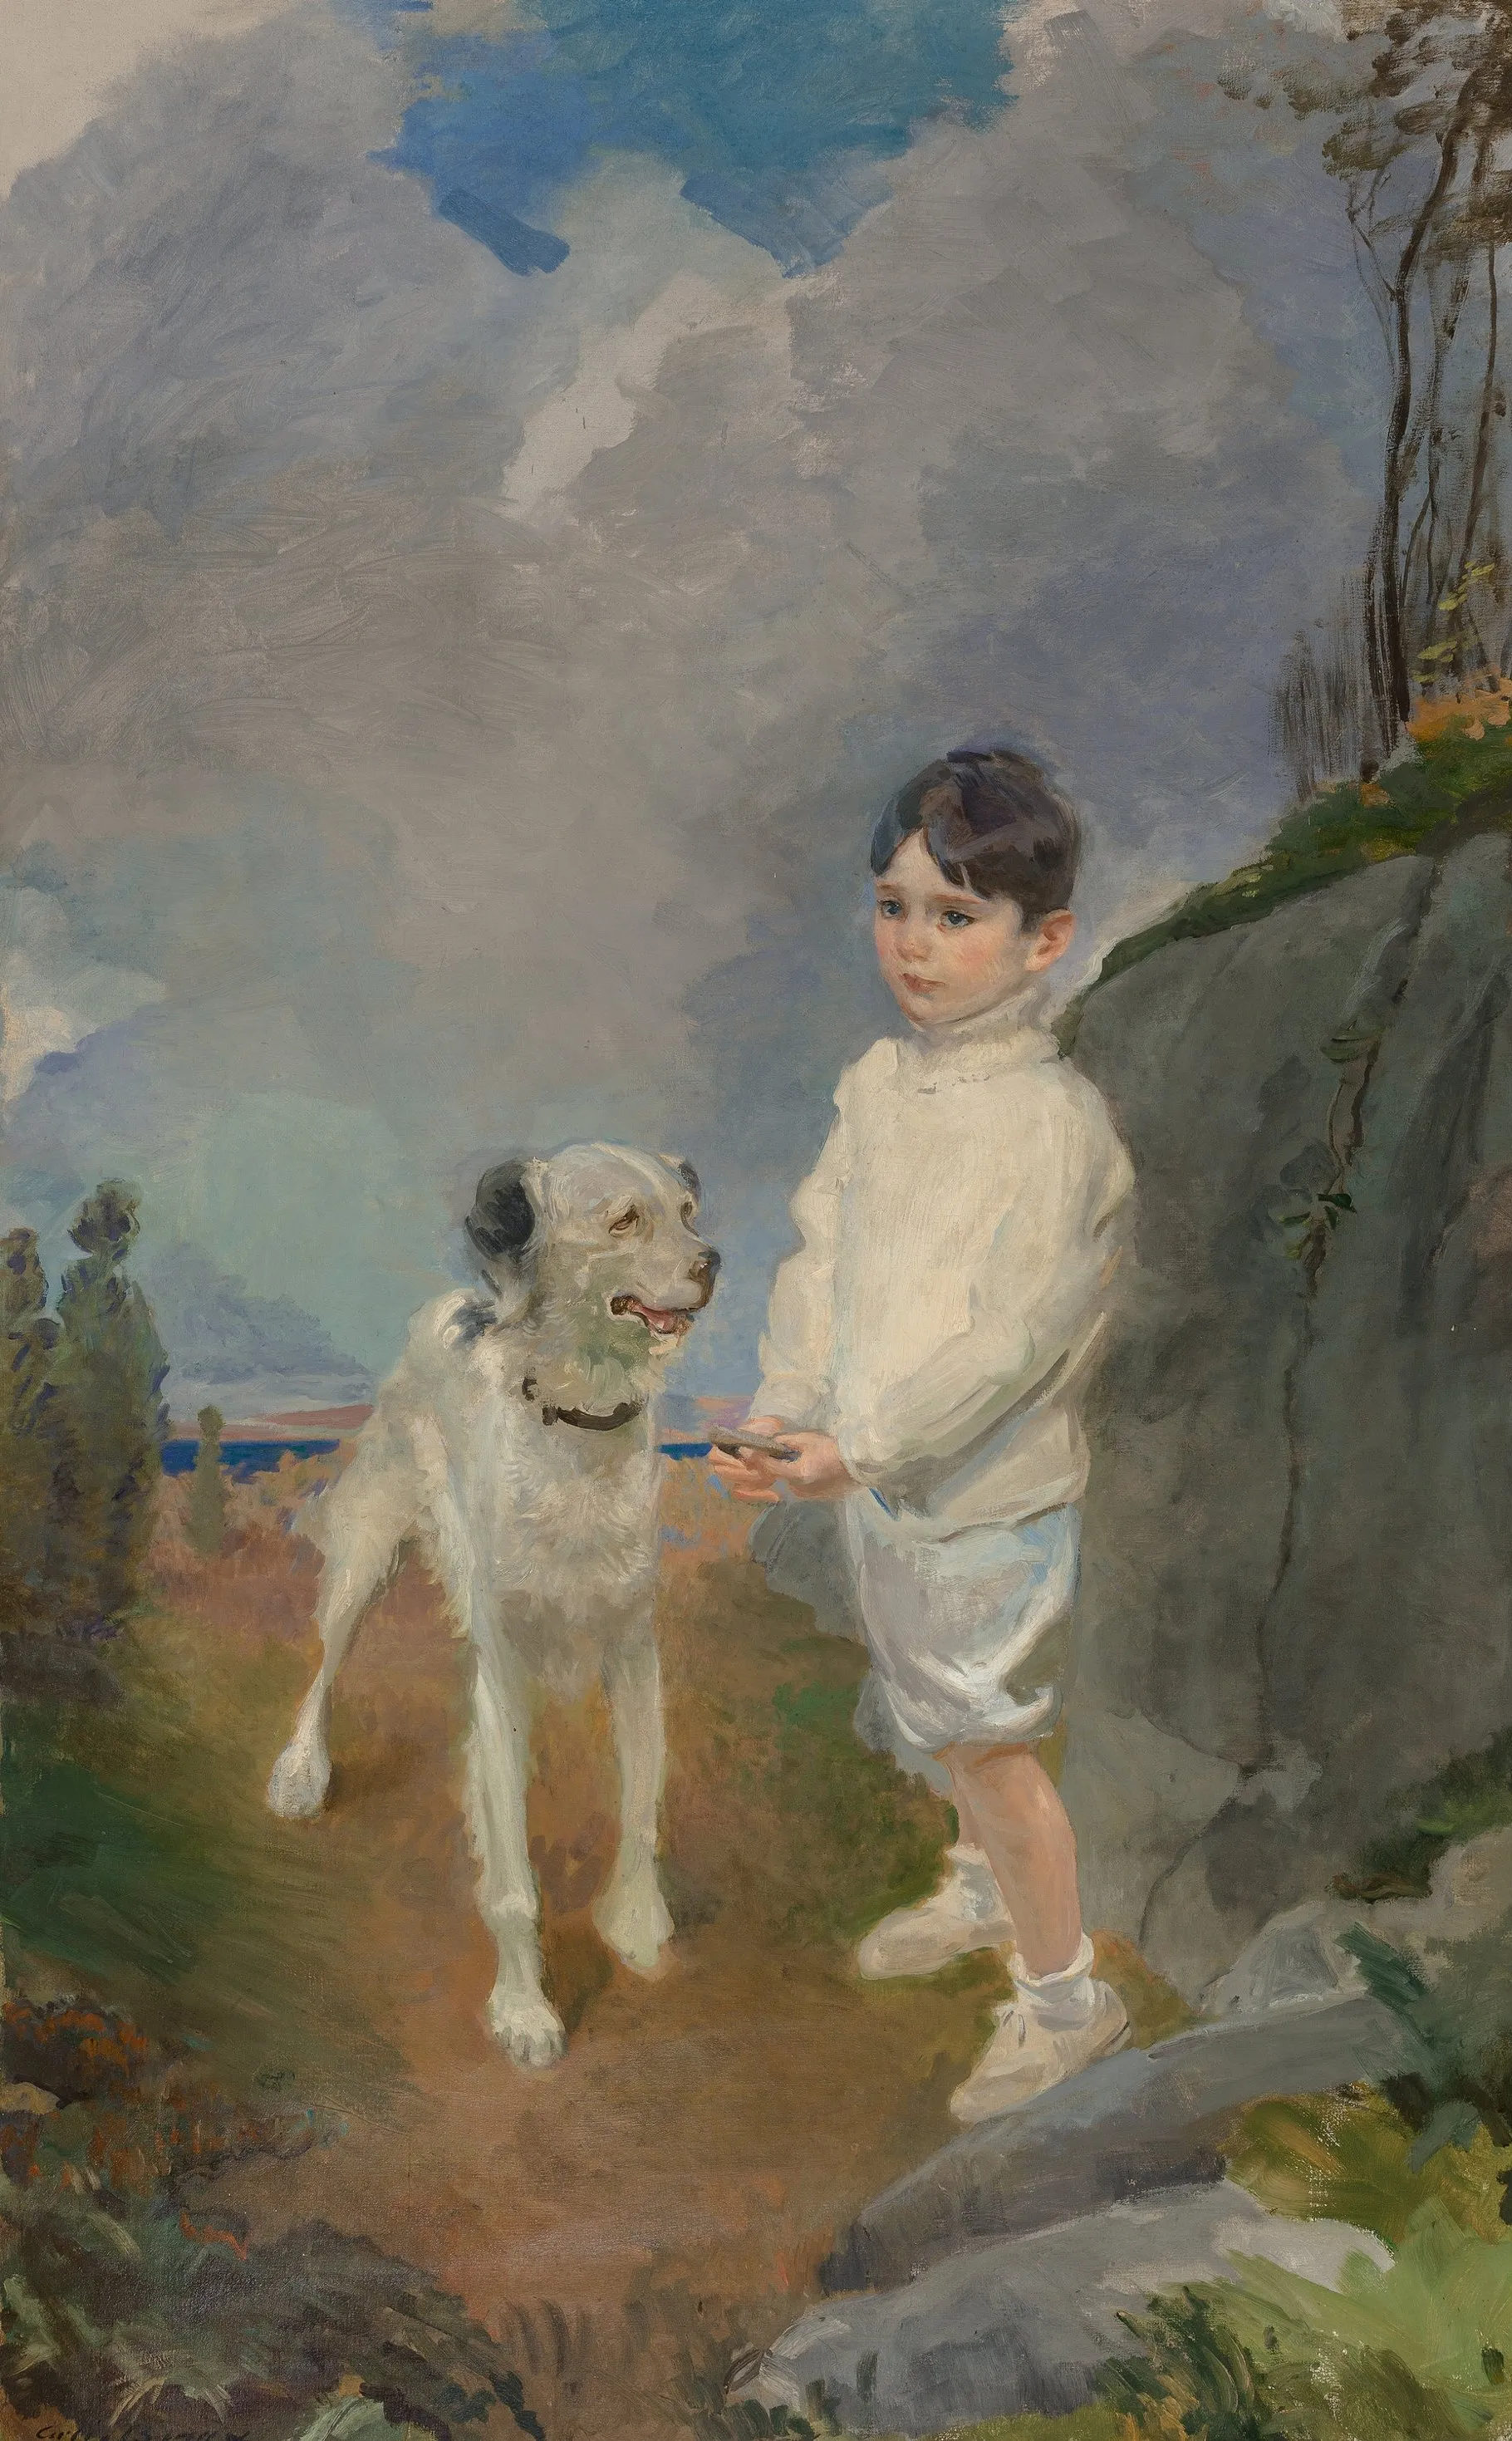 Cecilia-Beaux-Lane-Lovell-and-His-Dog-1913-1914